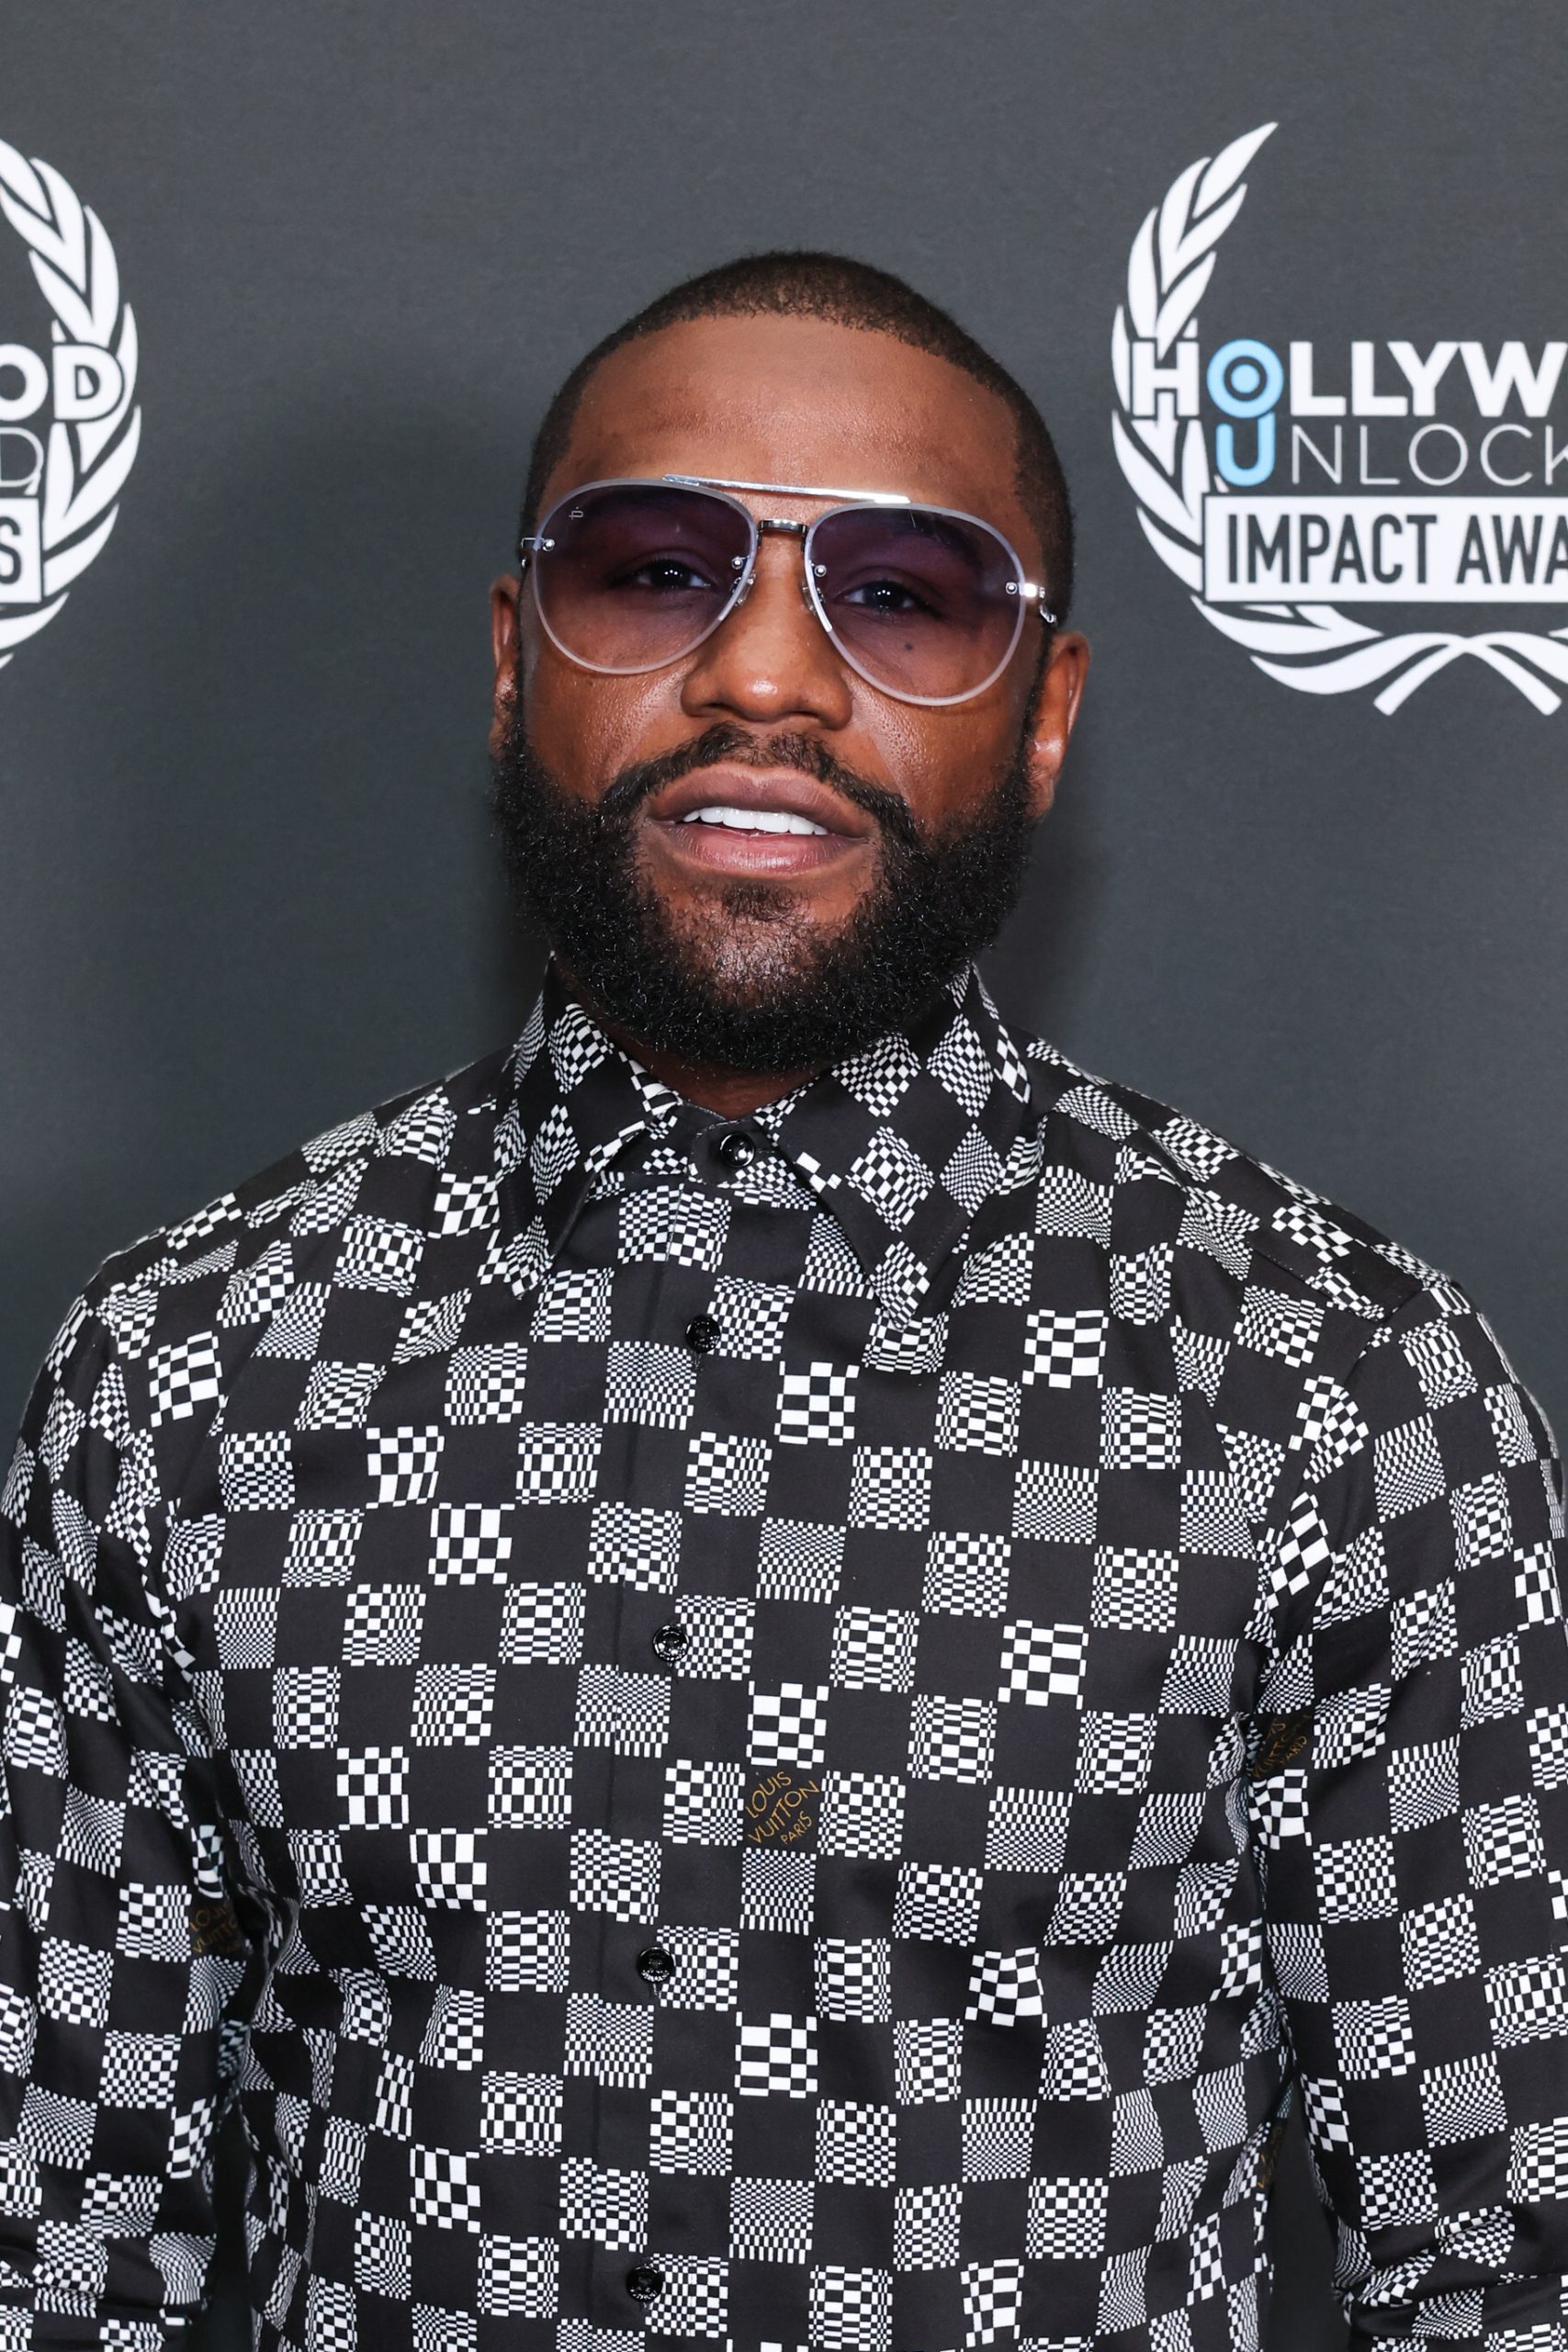 Floyd Mayweather attends the 2nd annual Hollywood Unlocked Impact Awards